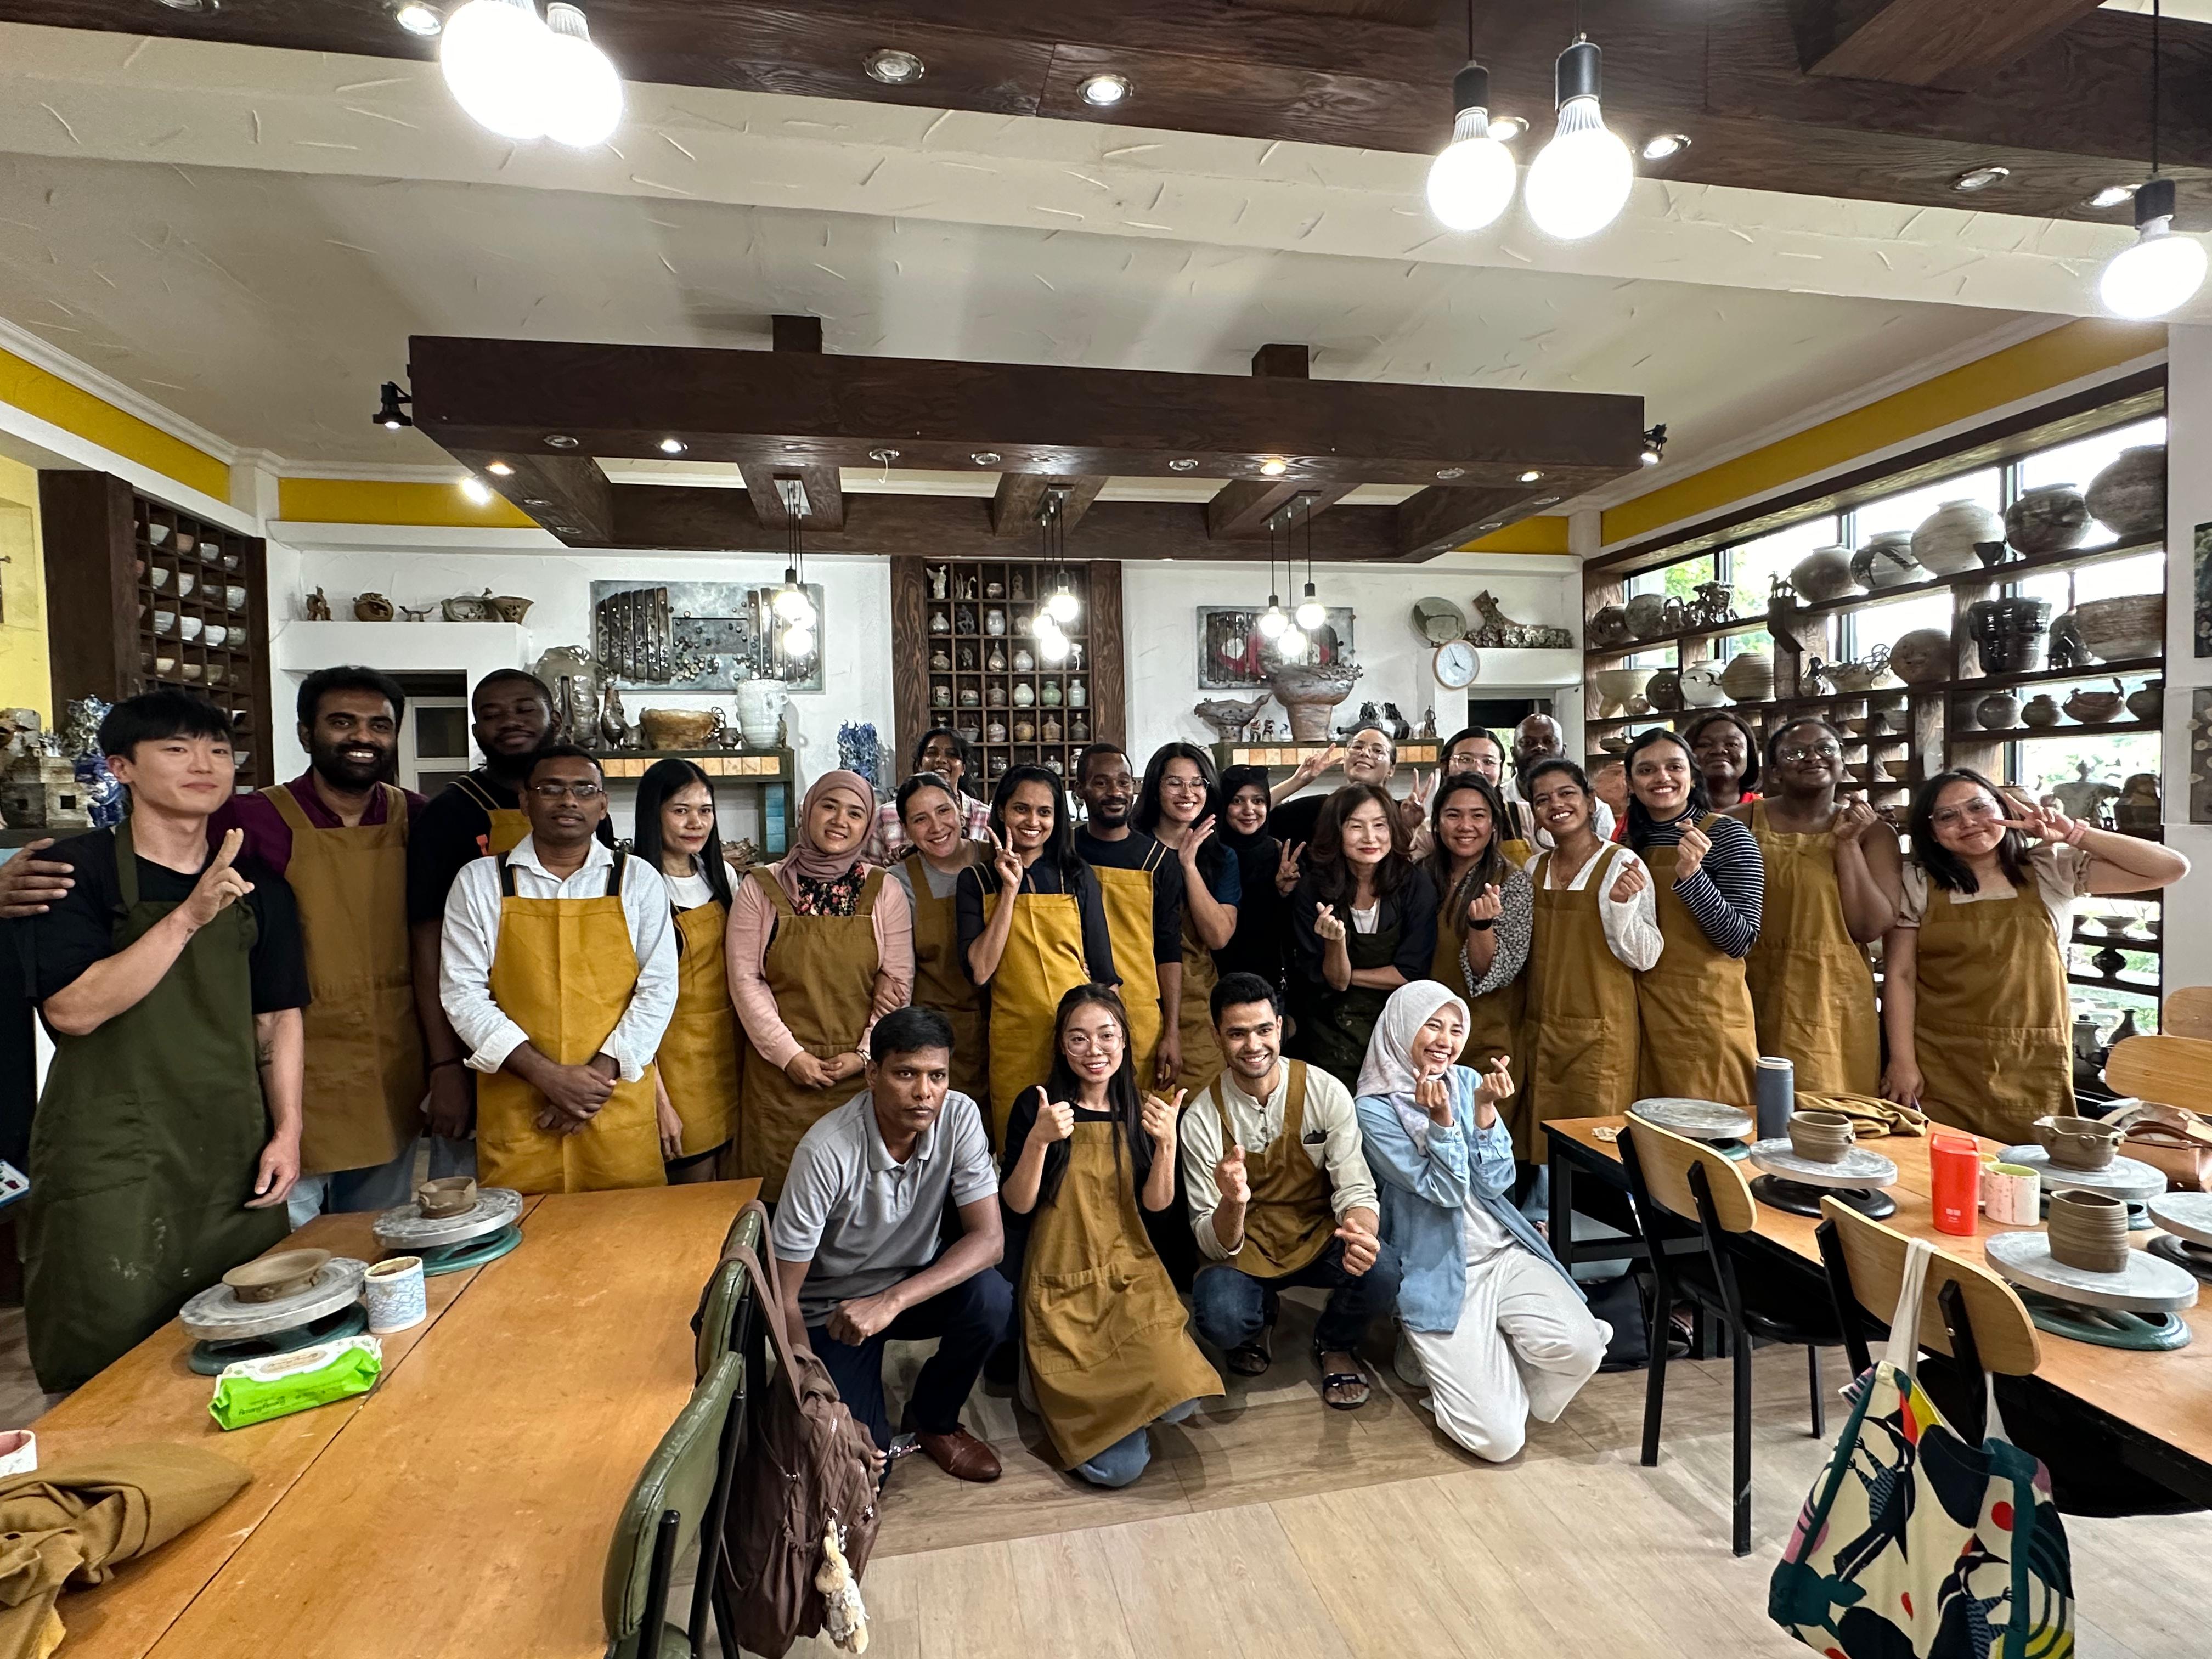 Exploring Innovation and Creativity: KDI School’s Field Trip to ETRI and Pottery Class at Hanulkang Atelier